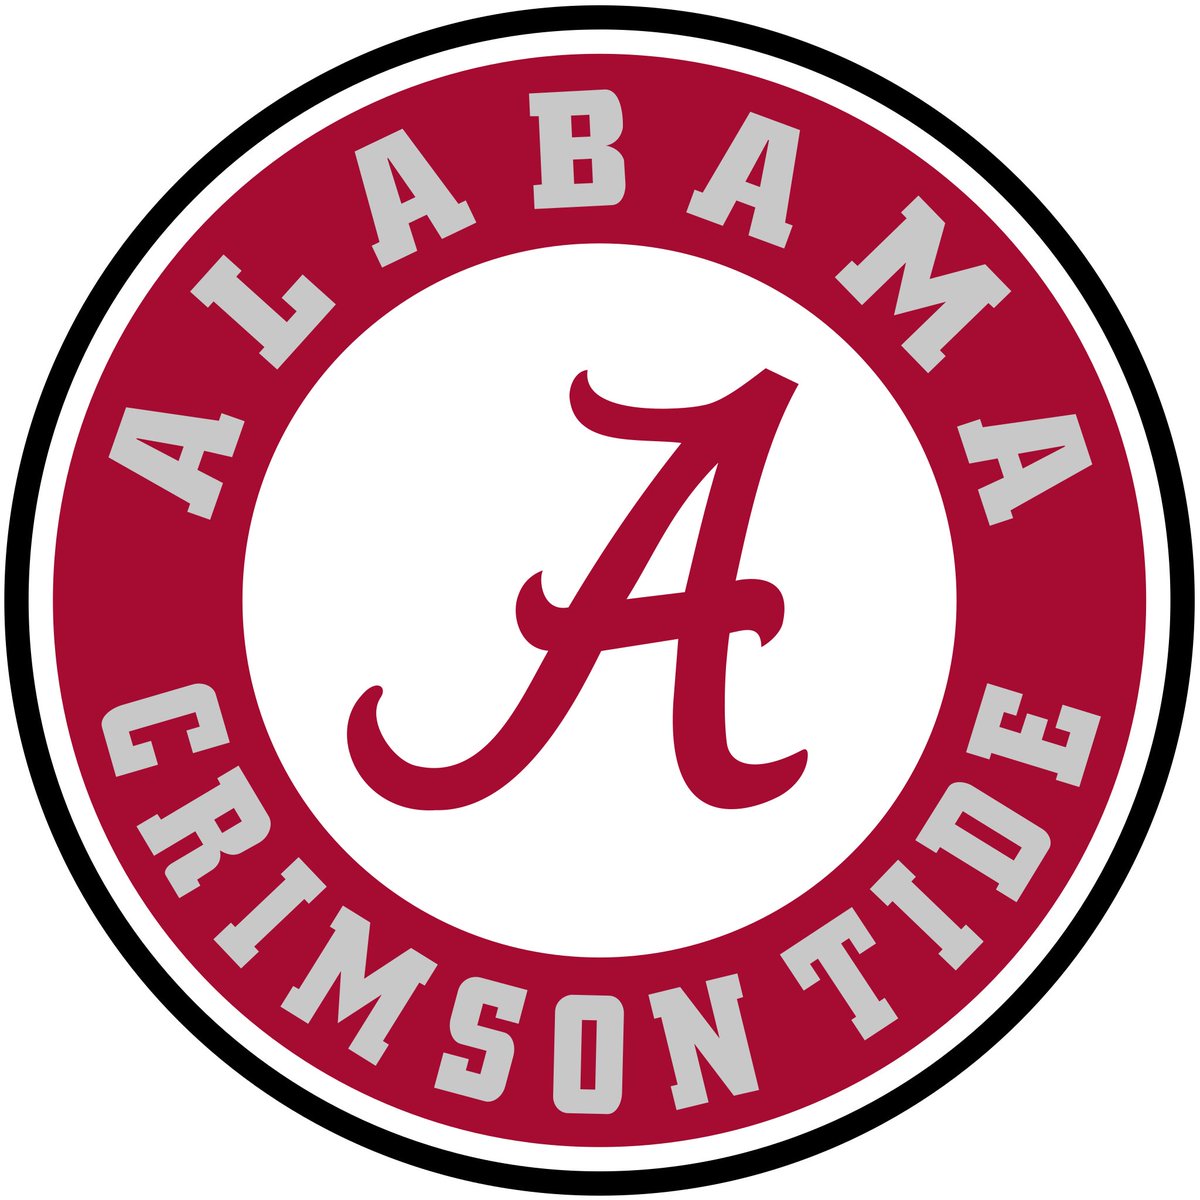 Truly blessed to receive an offer from the University of Alabama 🙏🏾 #crimsontide #RollTide